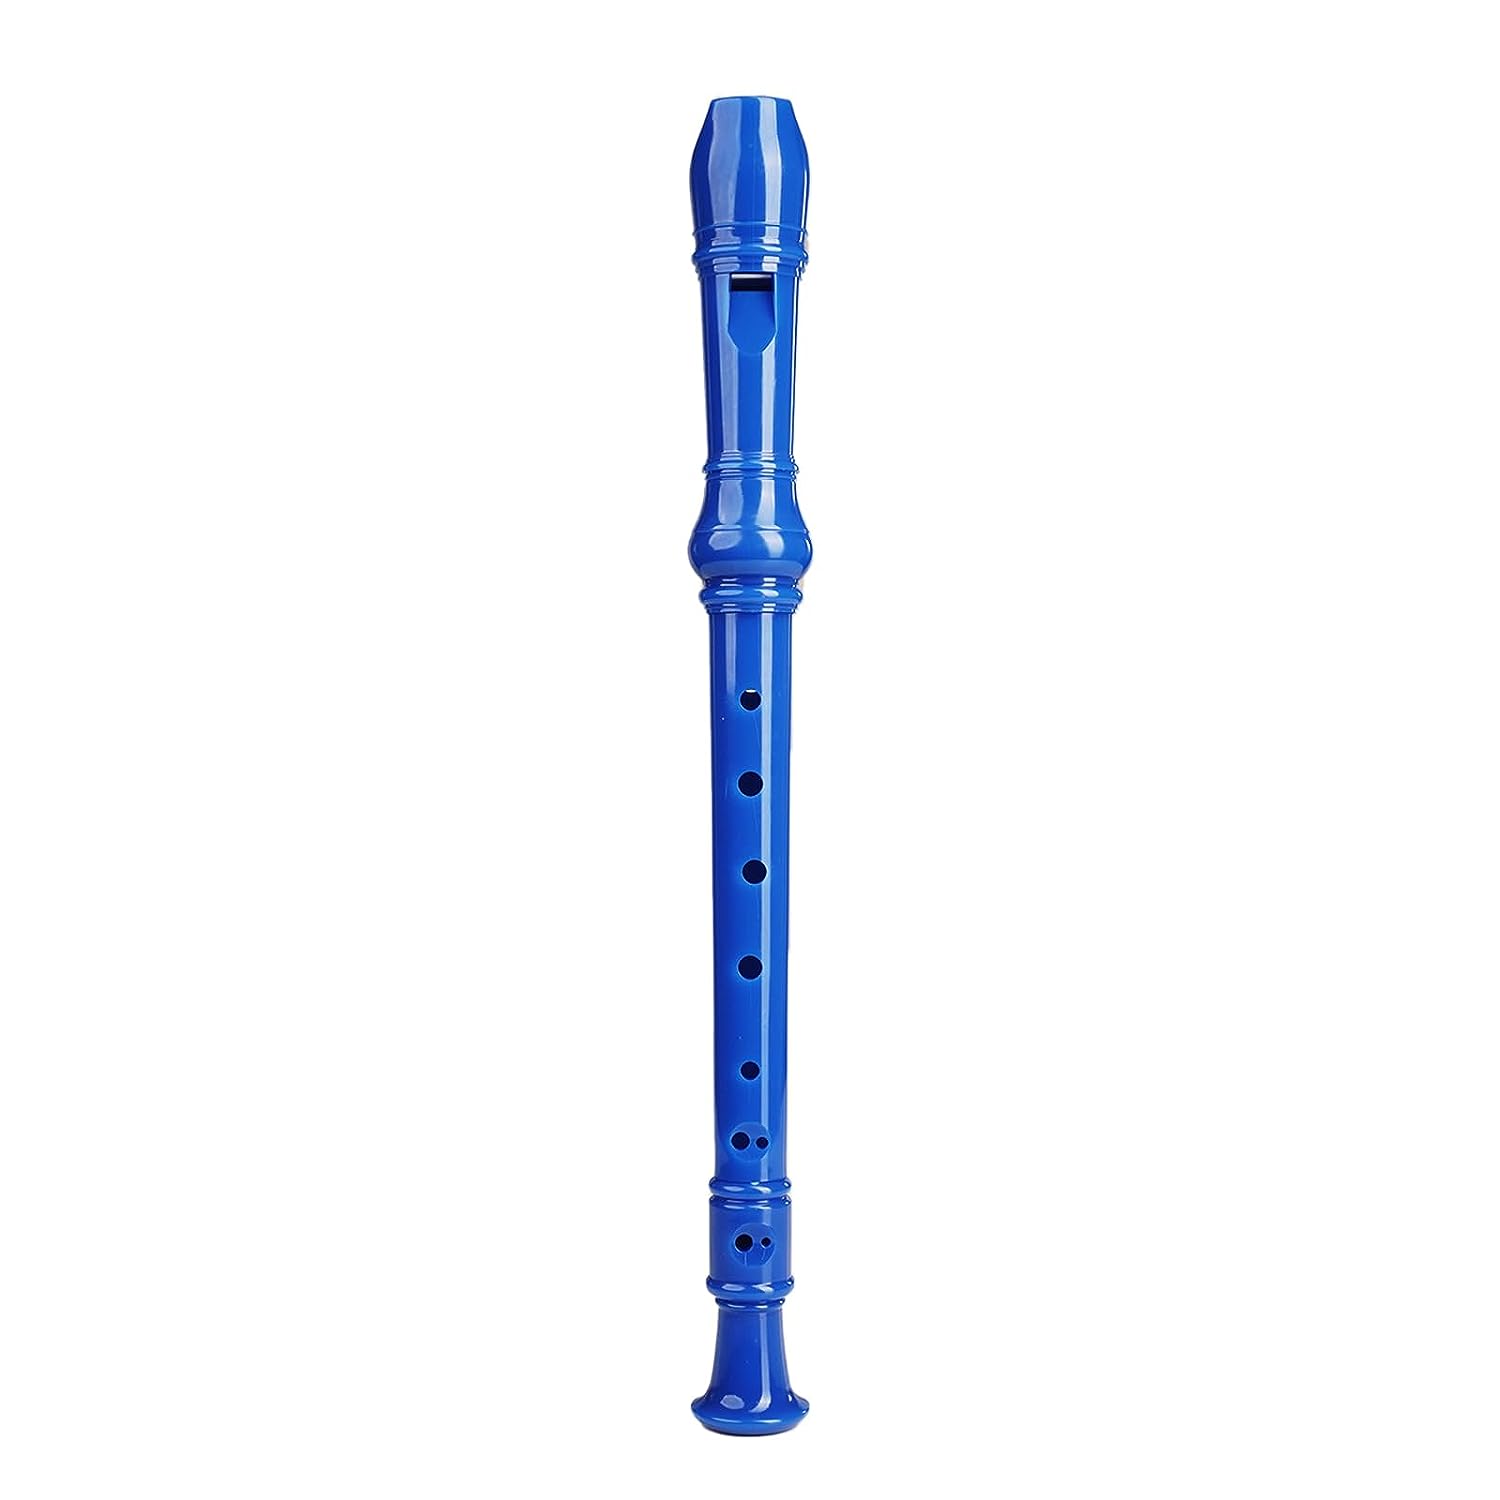 Kadence Soprano Recorder 8-hole (Red) With Cleaning Rod + Cover KAD-REC-RED (BLUE)